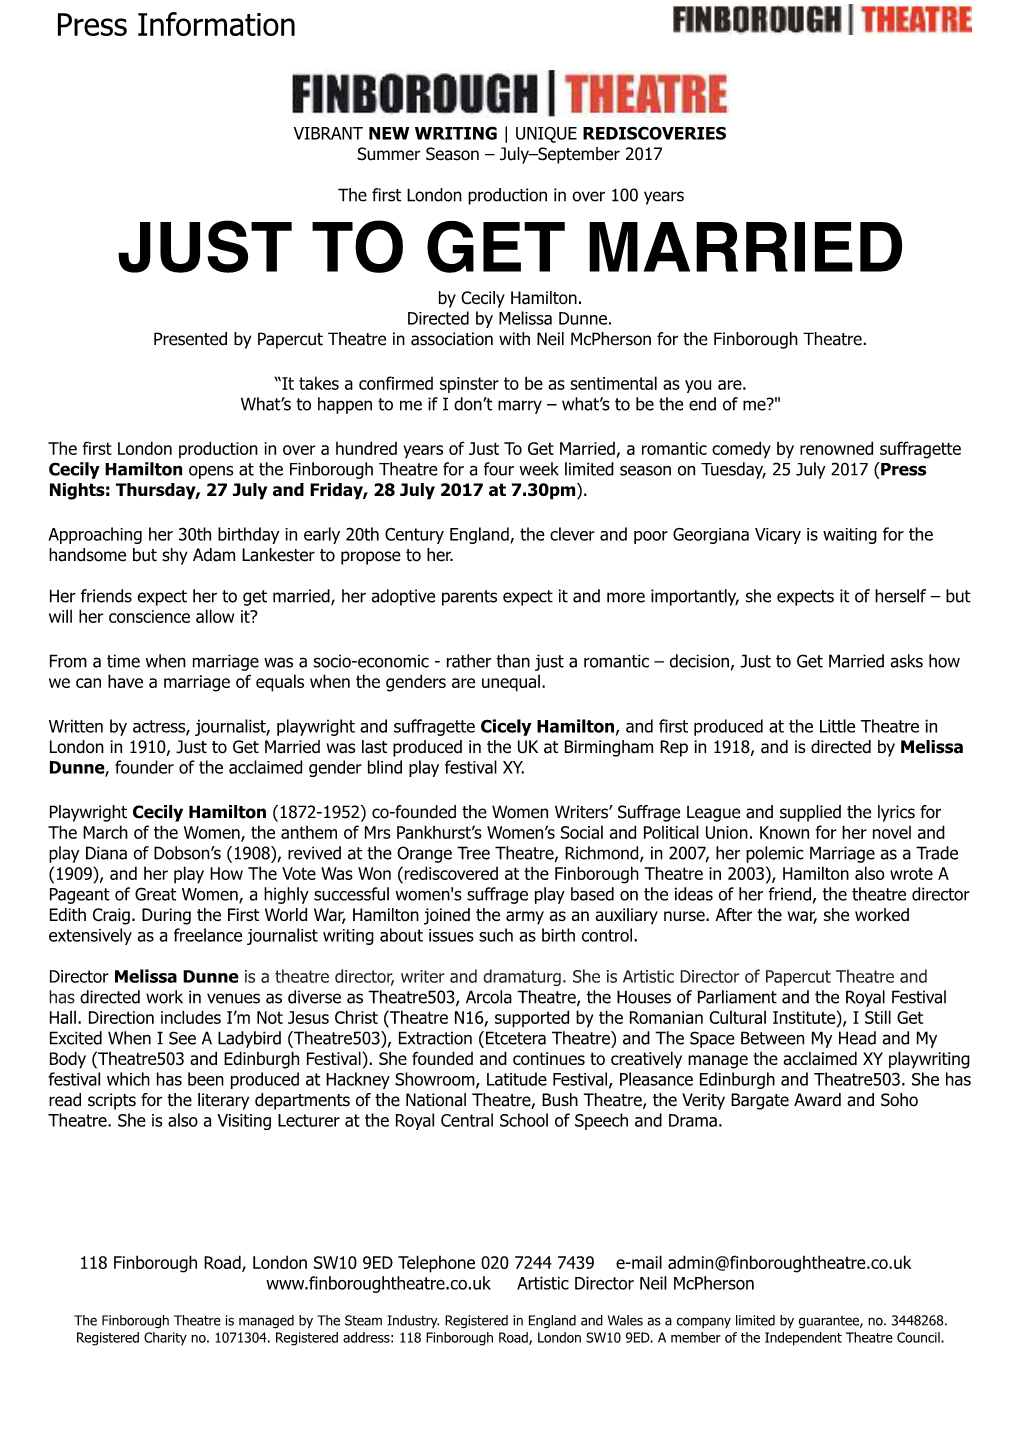 JUST to GET MARRIED by Cecily Hamilton